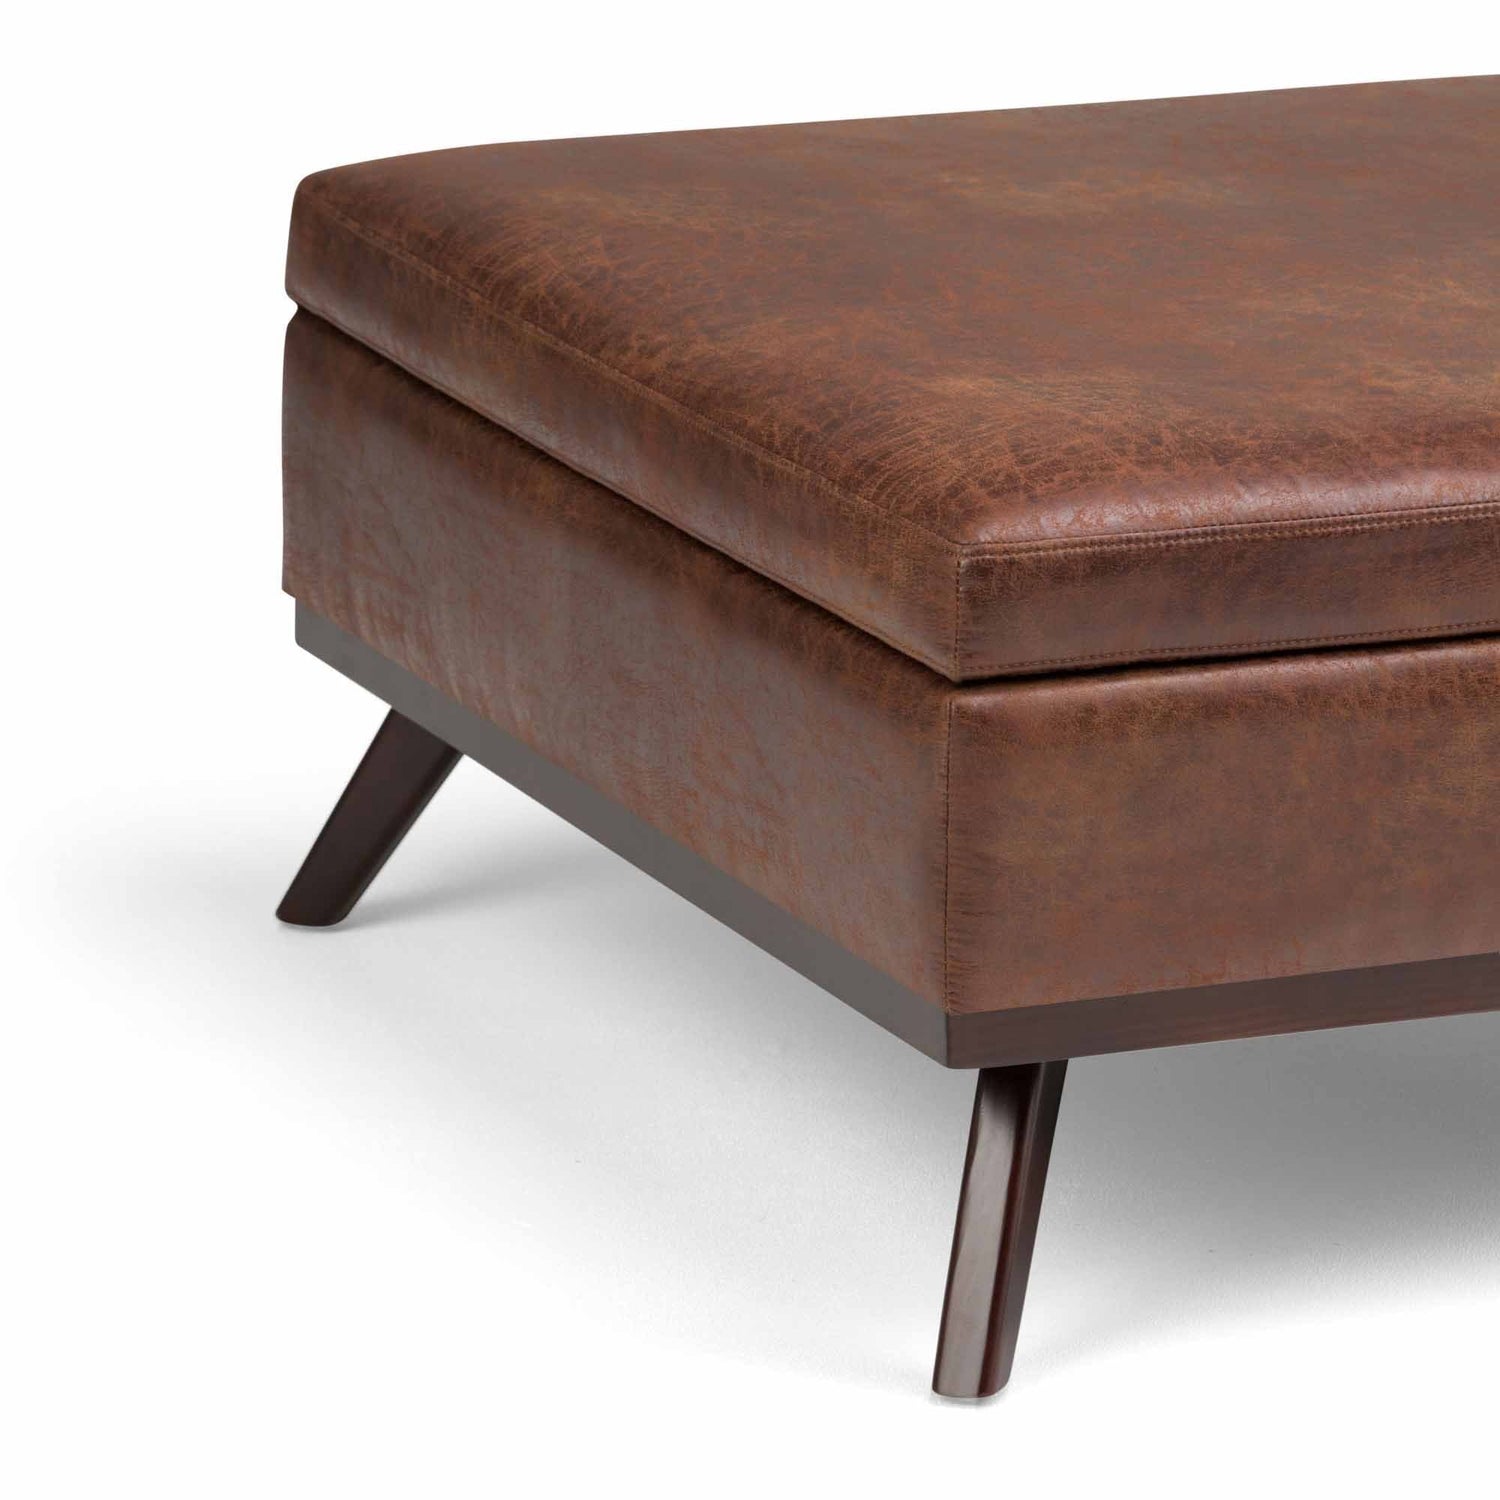 Distressed Saddle Brown Distressed Vegan Leather | Owen Coffee Table Ottoman with Storage